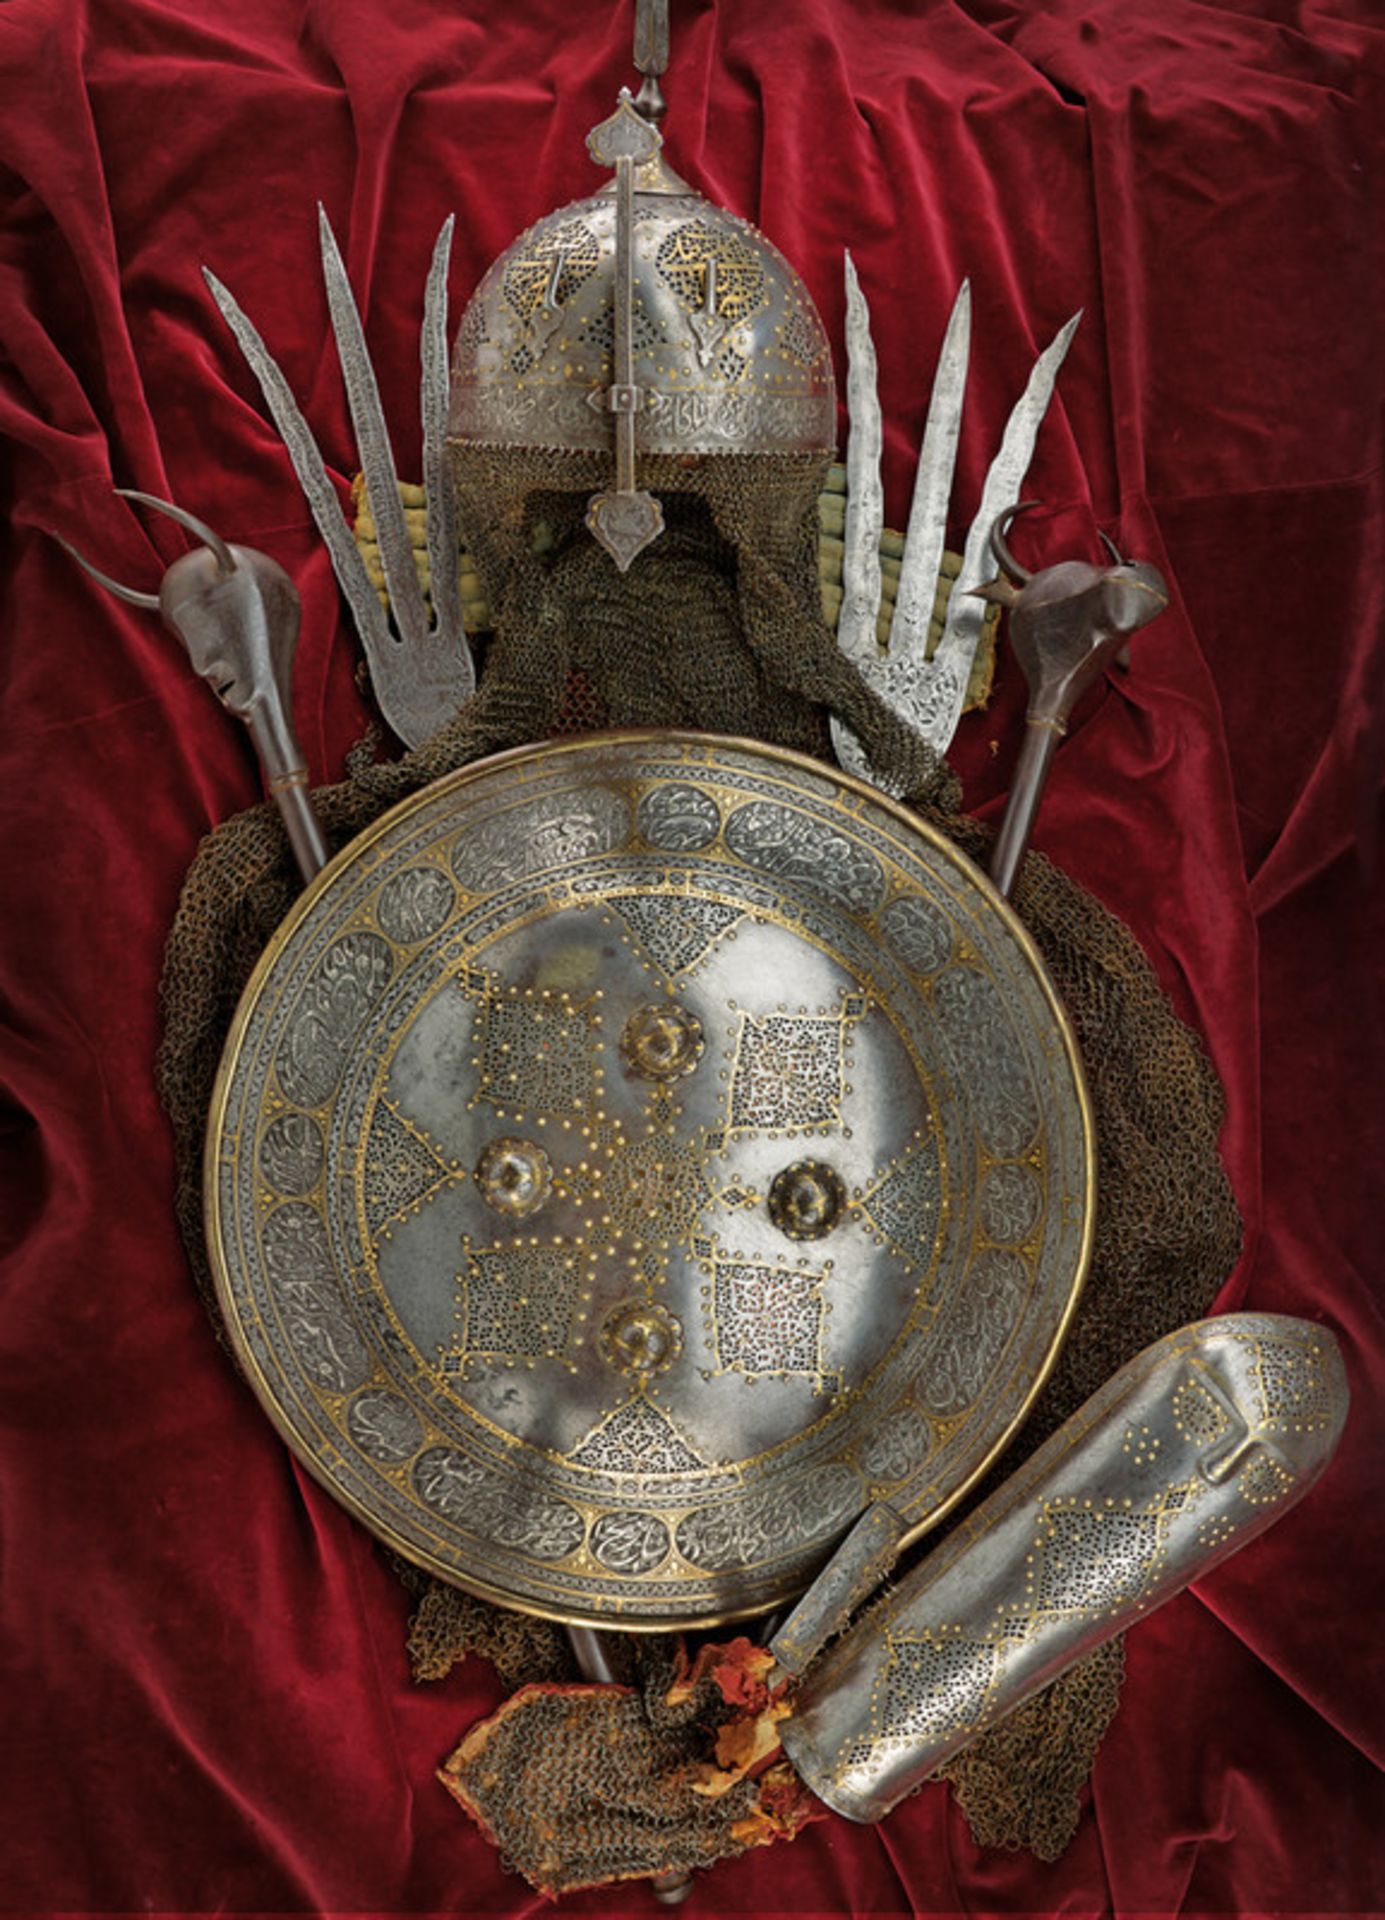 A rare and beautiful set from the property of a high ranked warrior dating: mid-19th Century